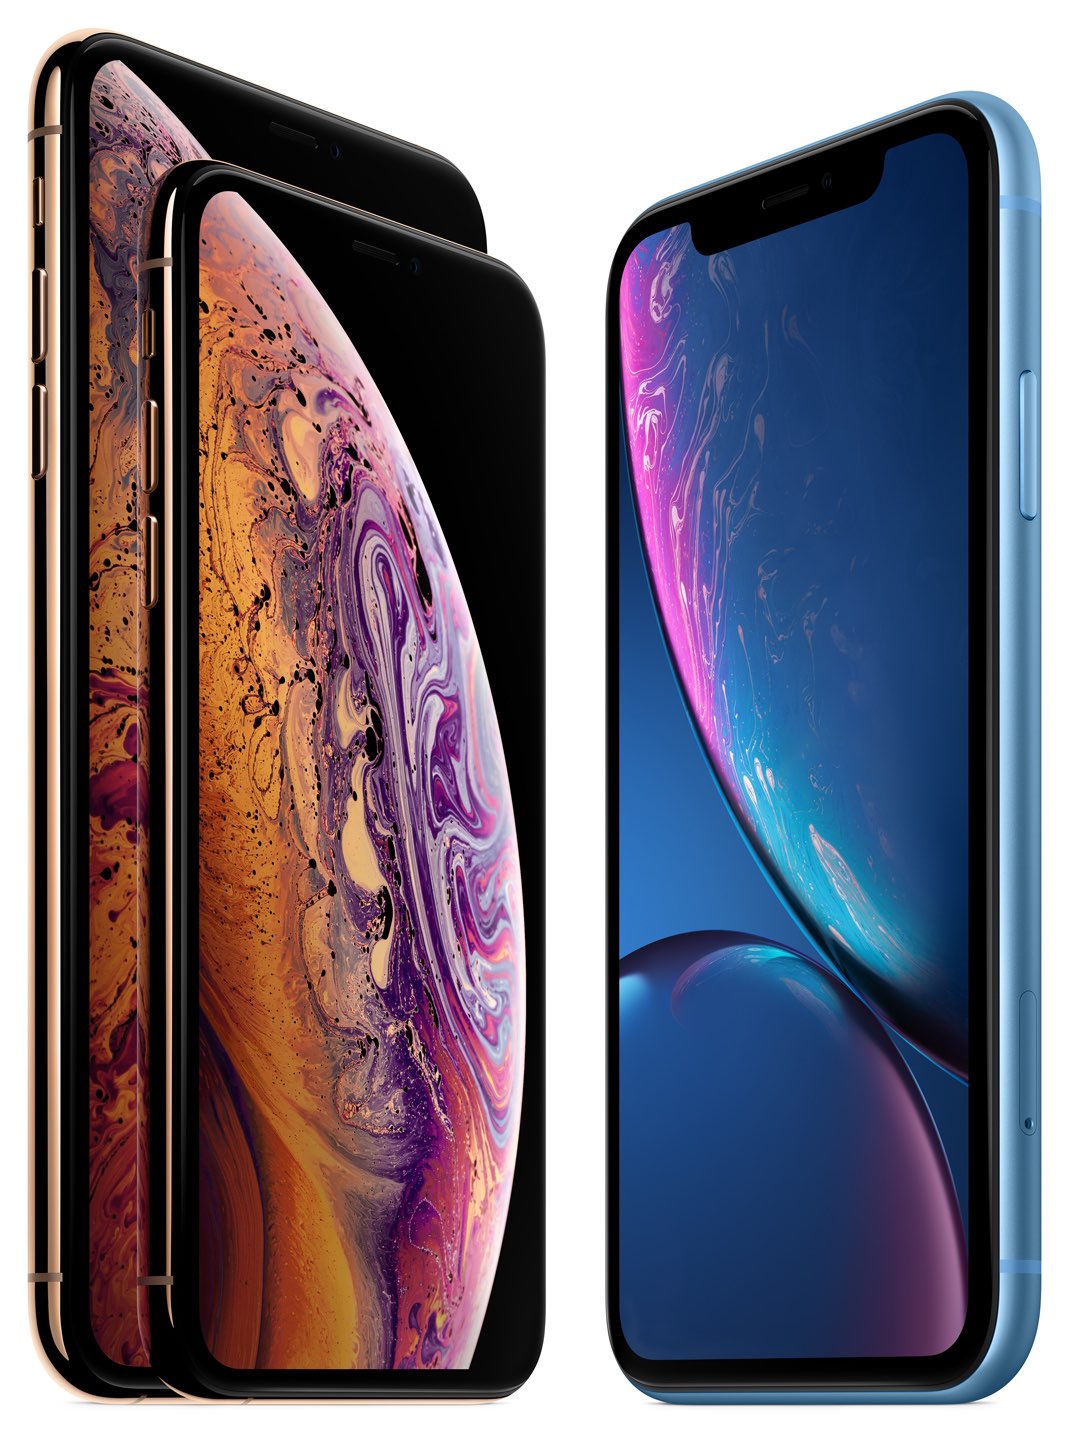 iPhone Xs, iPhone Xs Max and iPhone Xr